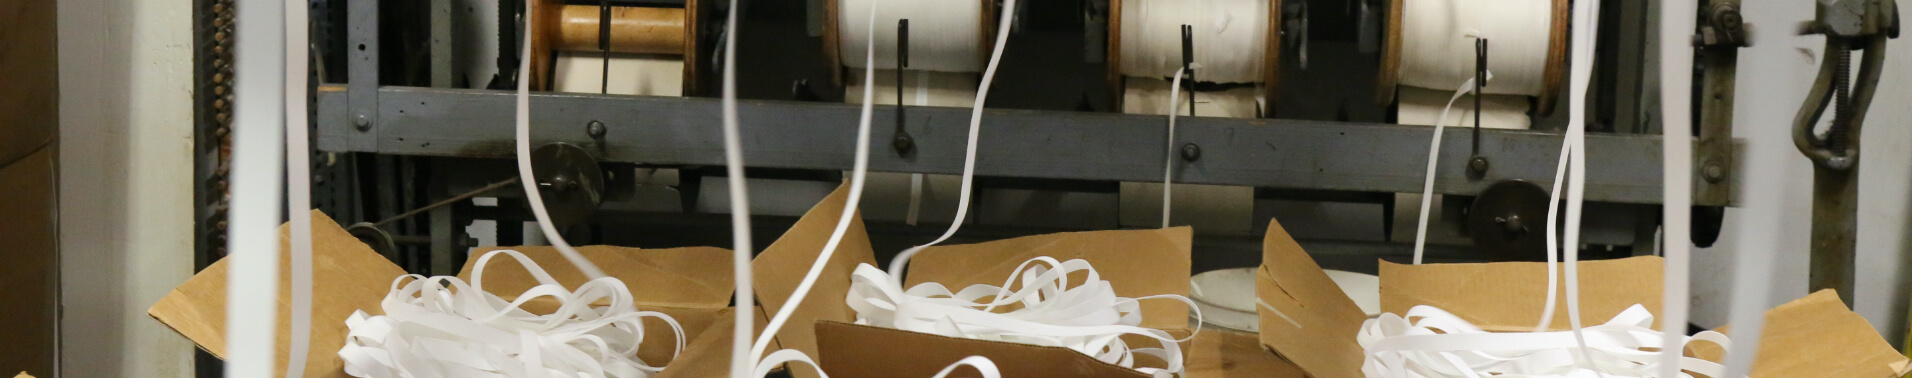 Bleached white fabric exiting a manufacturing process and collecting in cardboard boxes